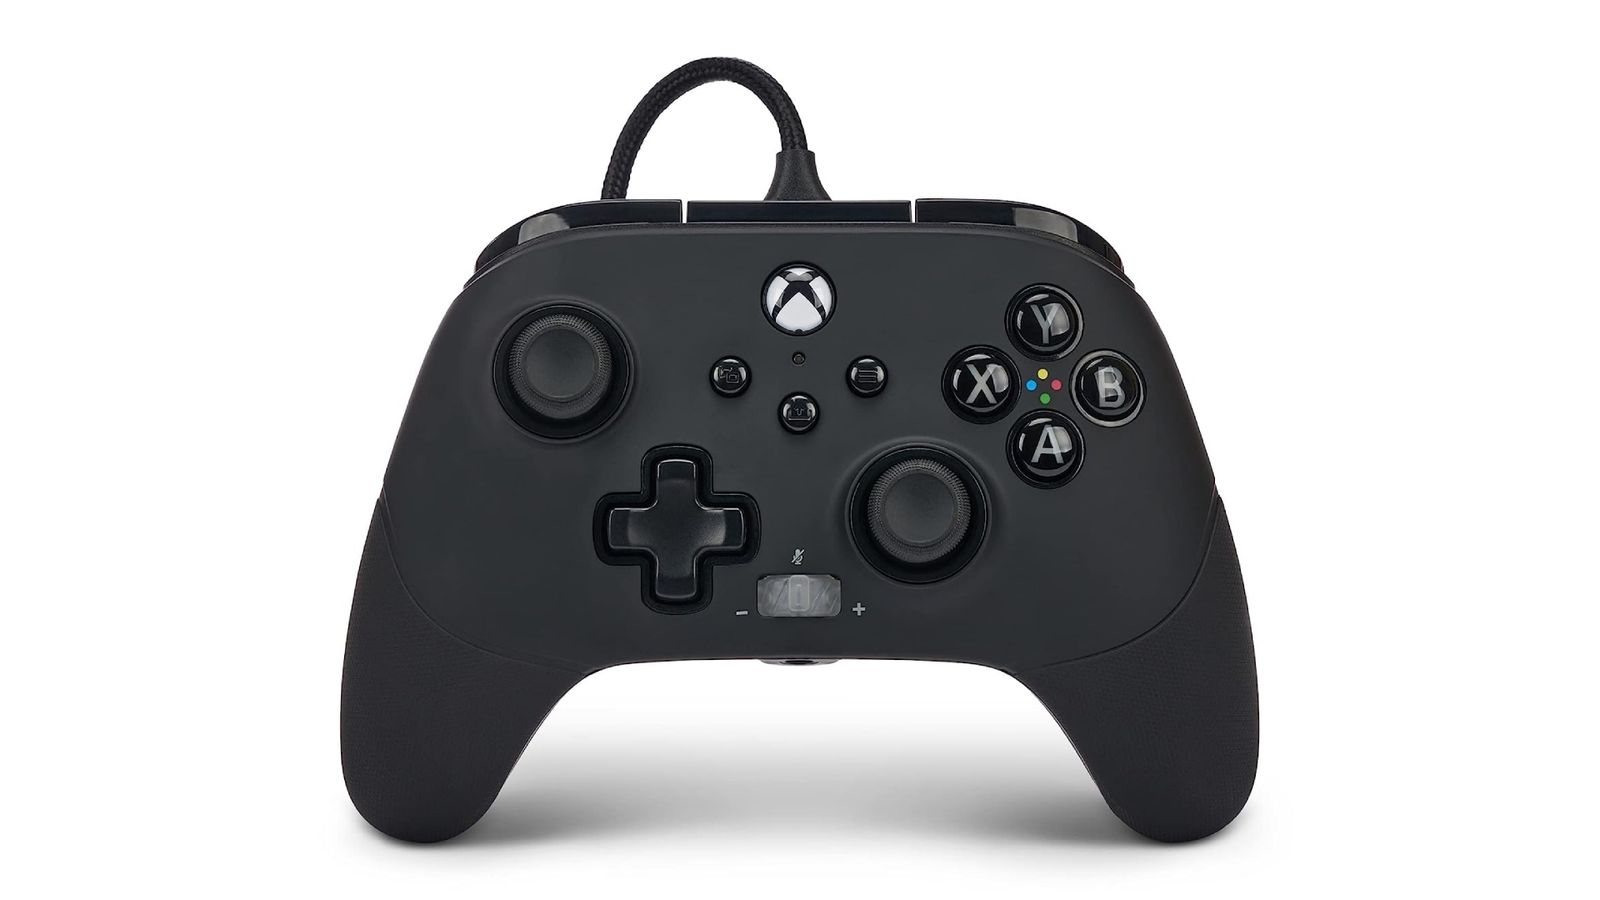 PowerA Fusion Pro 3 product image of a black controller featuring Xbox branding in white at the top in the centre.